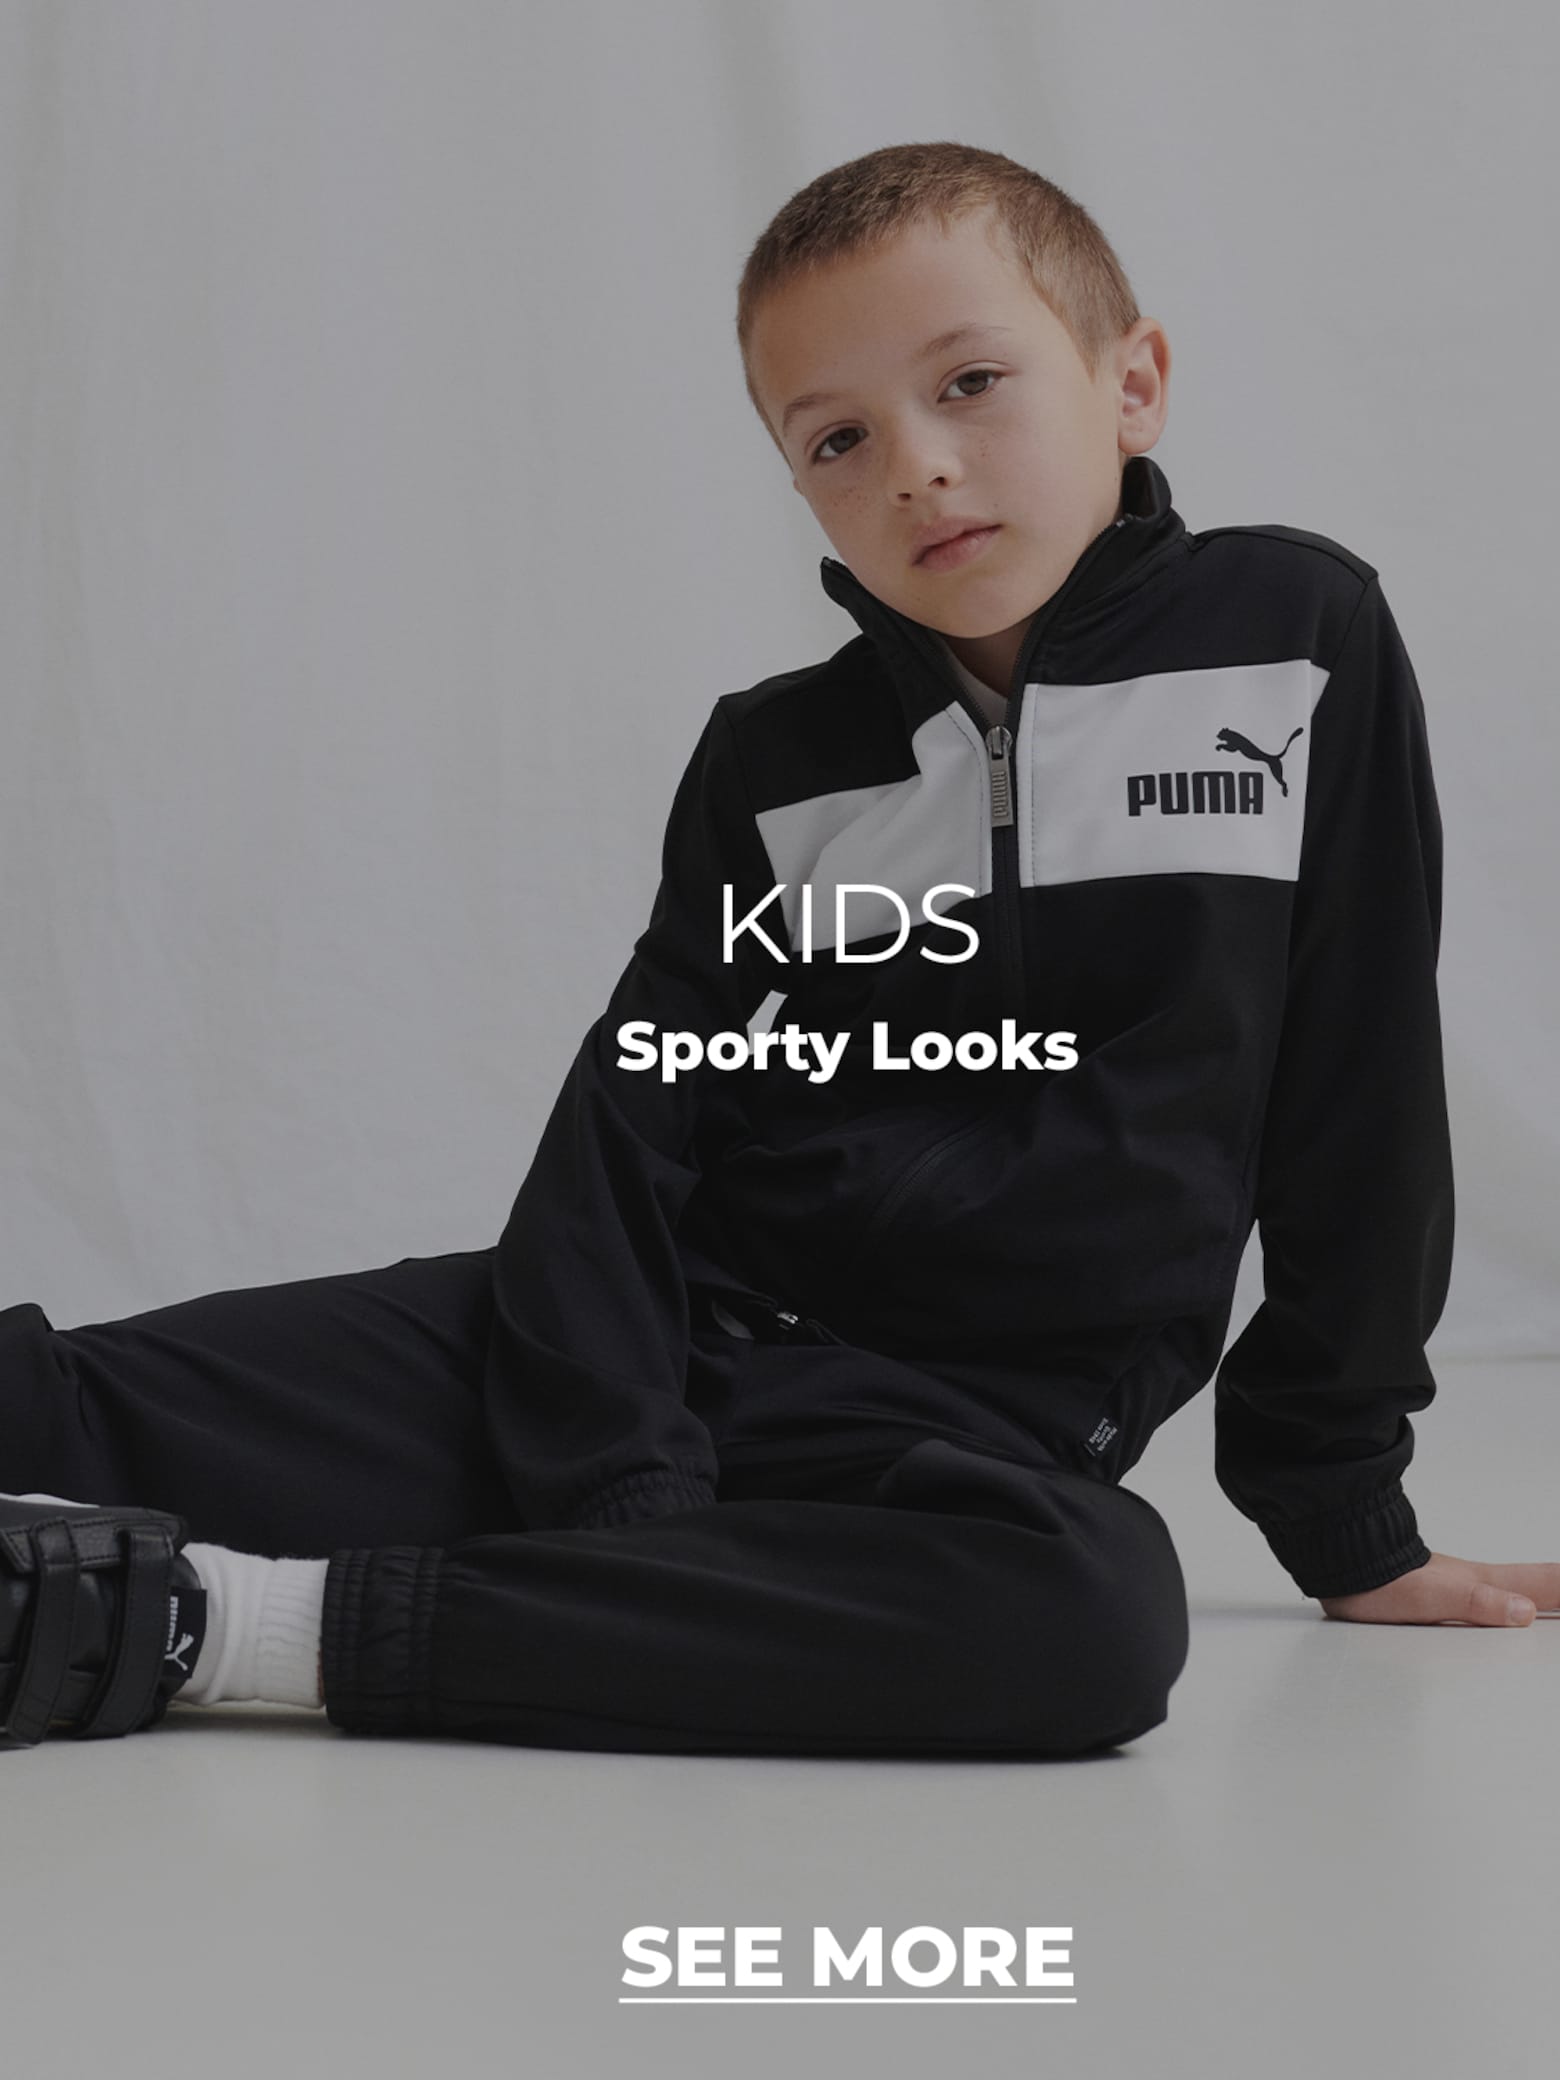 So practical Functional looks for boys